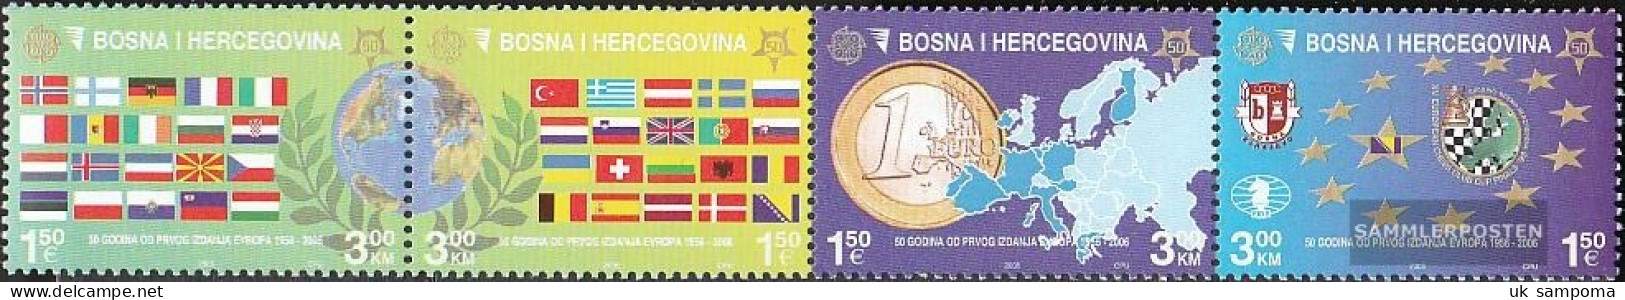 Bosnia-Herzegovina 419A-422A Quad Strip (complete Issue) Unmounted Mint / Never Hinged 2005 Europe Trade - Bosnia And Herzegovina